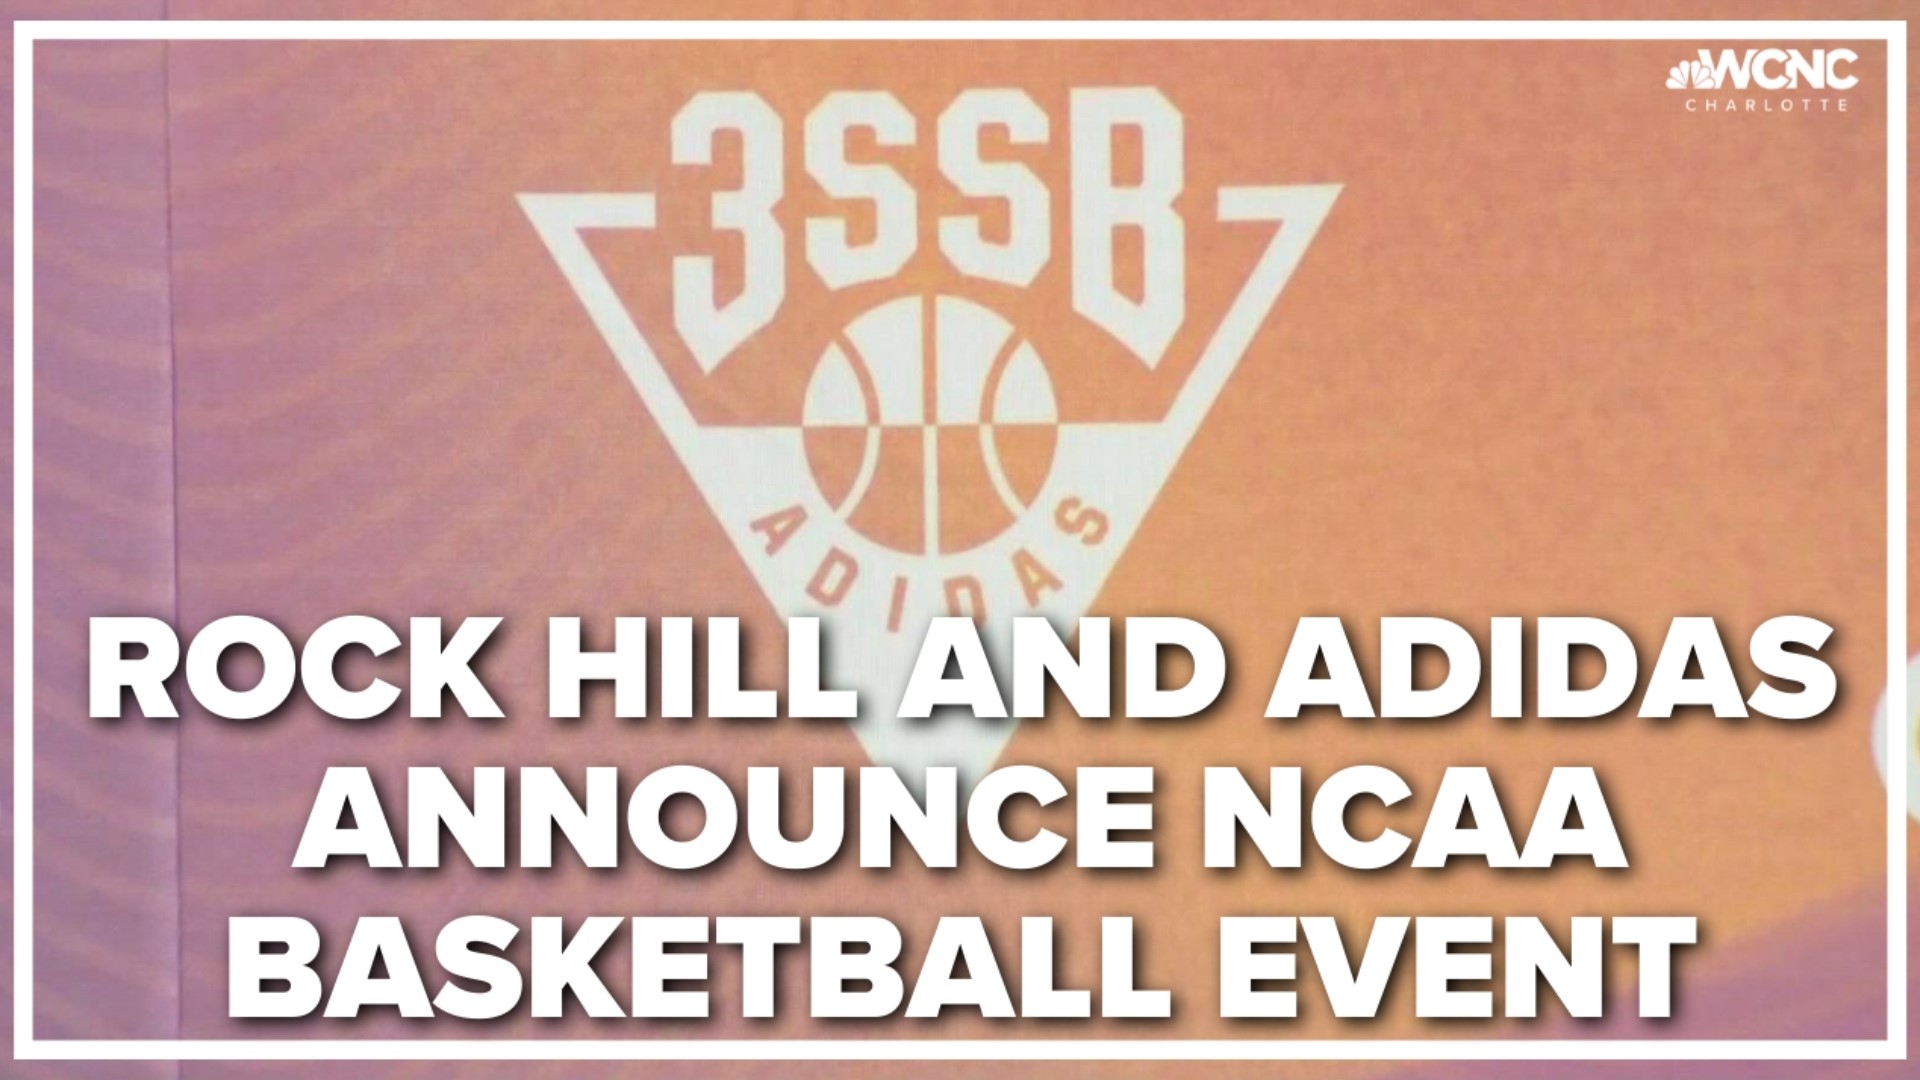 The city of Rock Hill and Adidas are teaming up to bring big time hoops to the area.